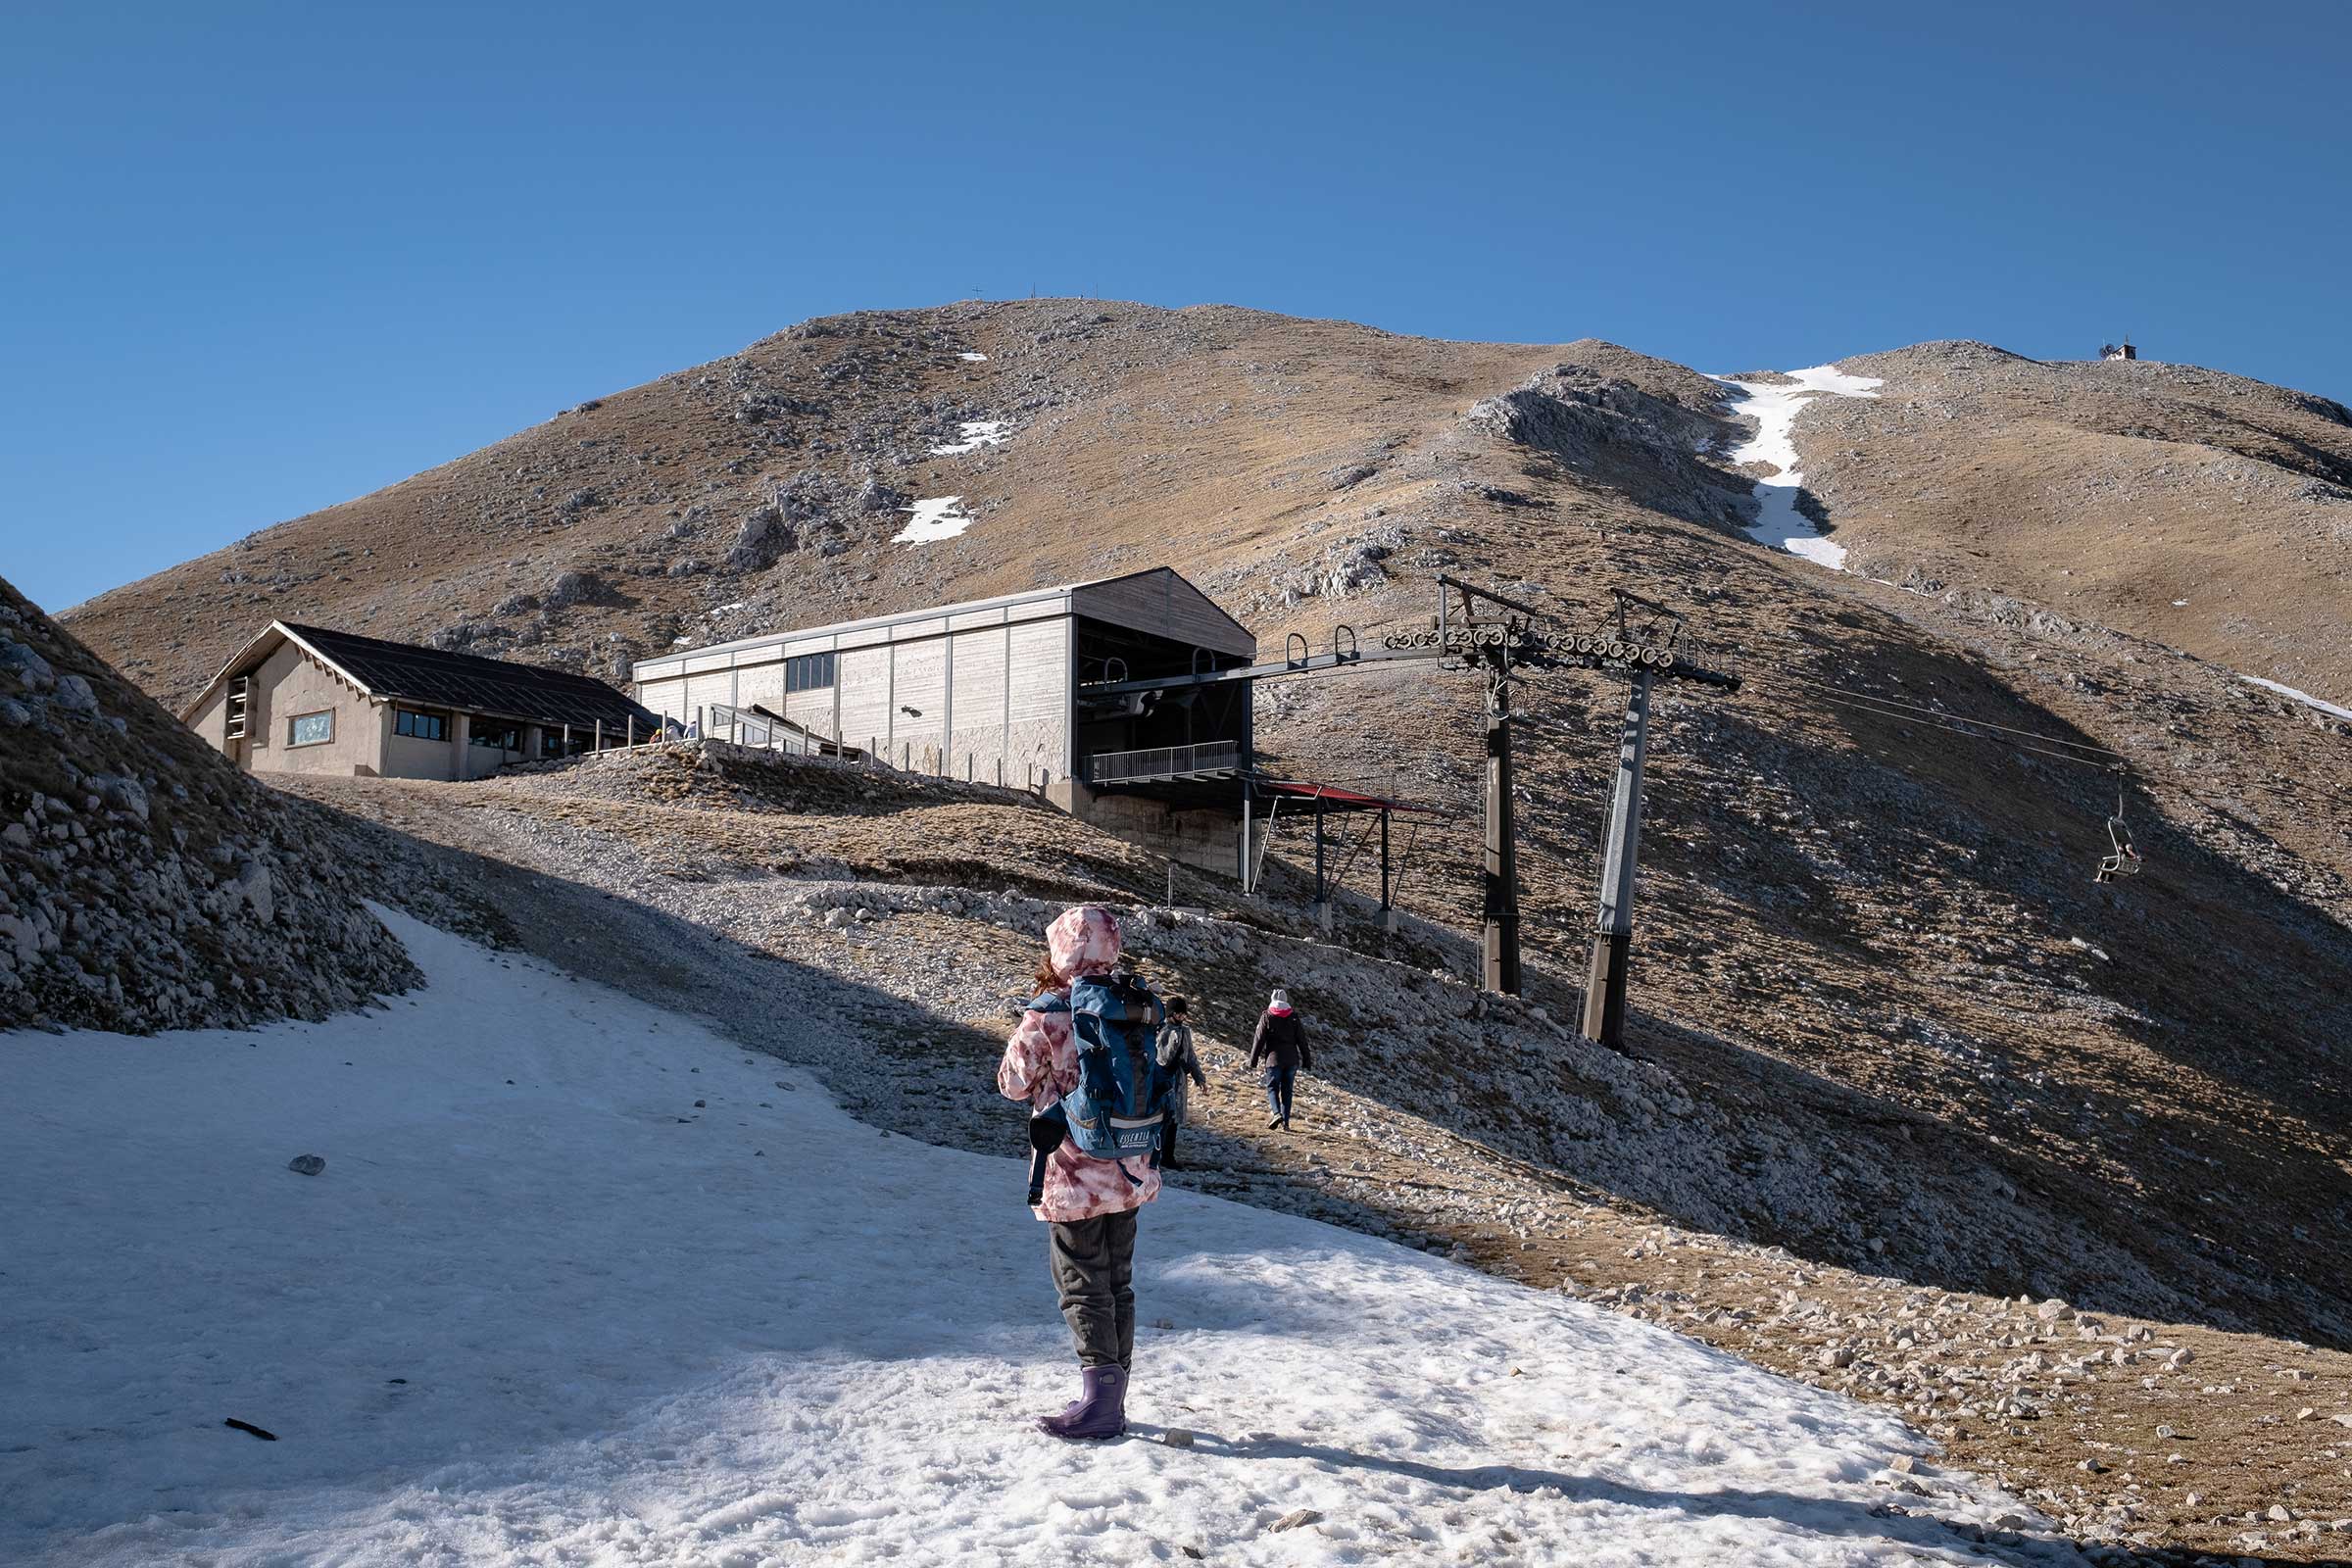 Campitello Matese, a popular ski resort in central and southern Italy, is unable to support skiers this season due to high temperatures and lack of snow.  (Manuel Dorati)